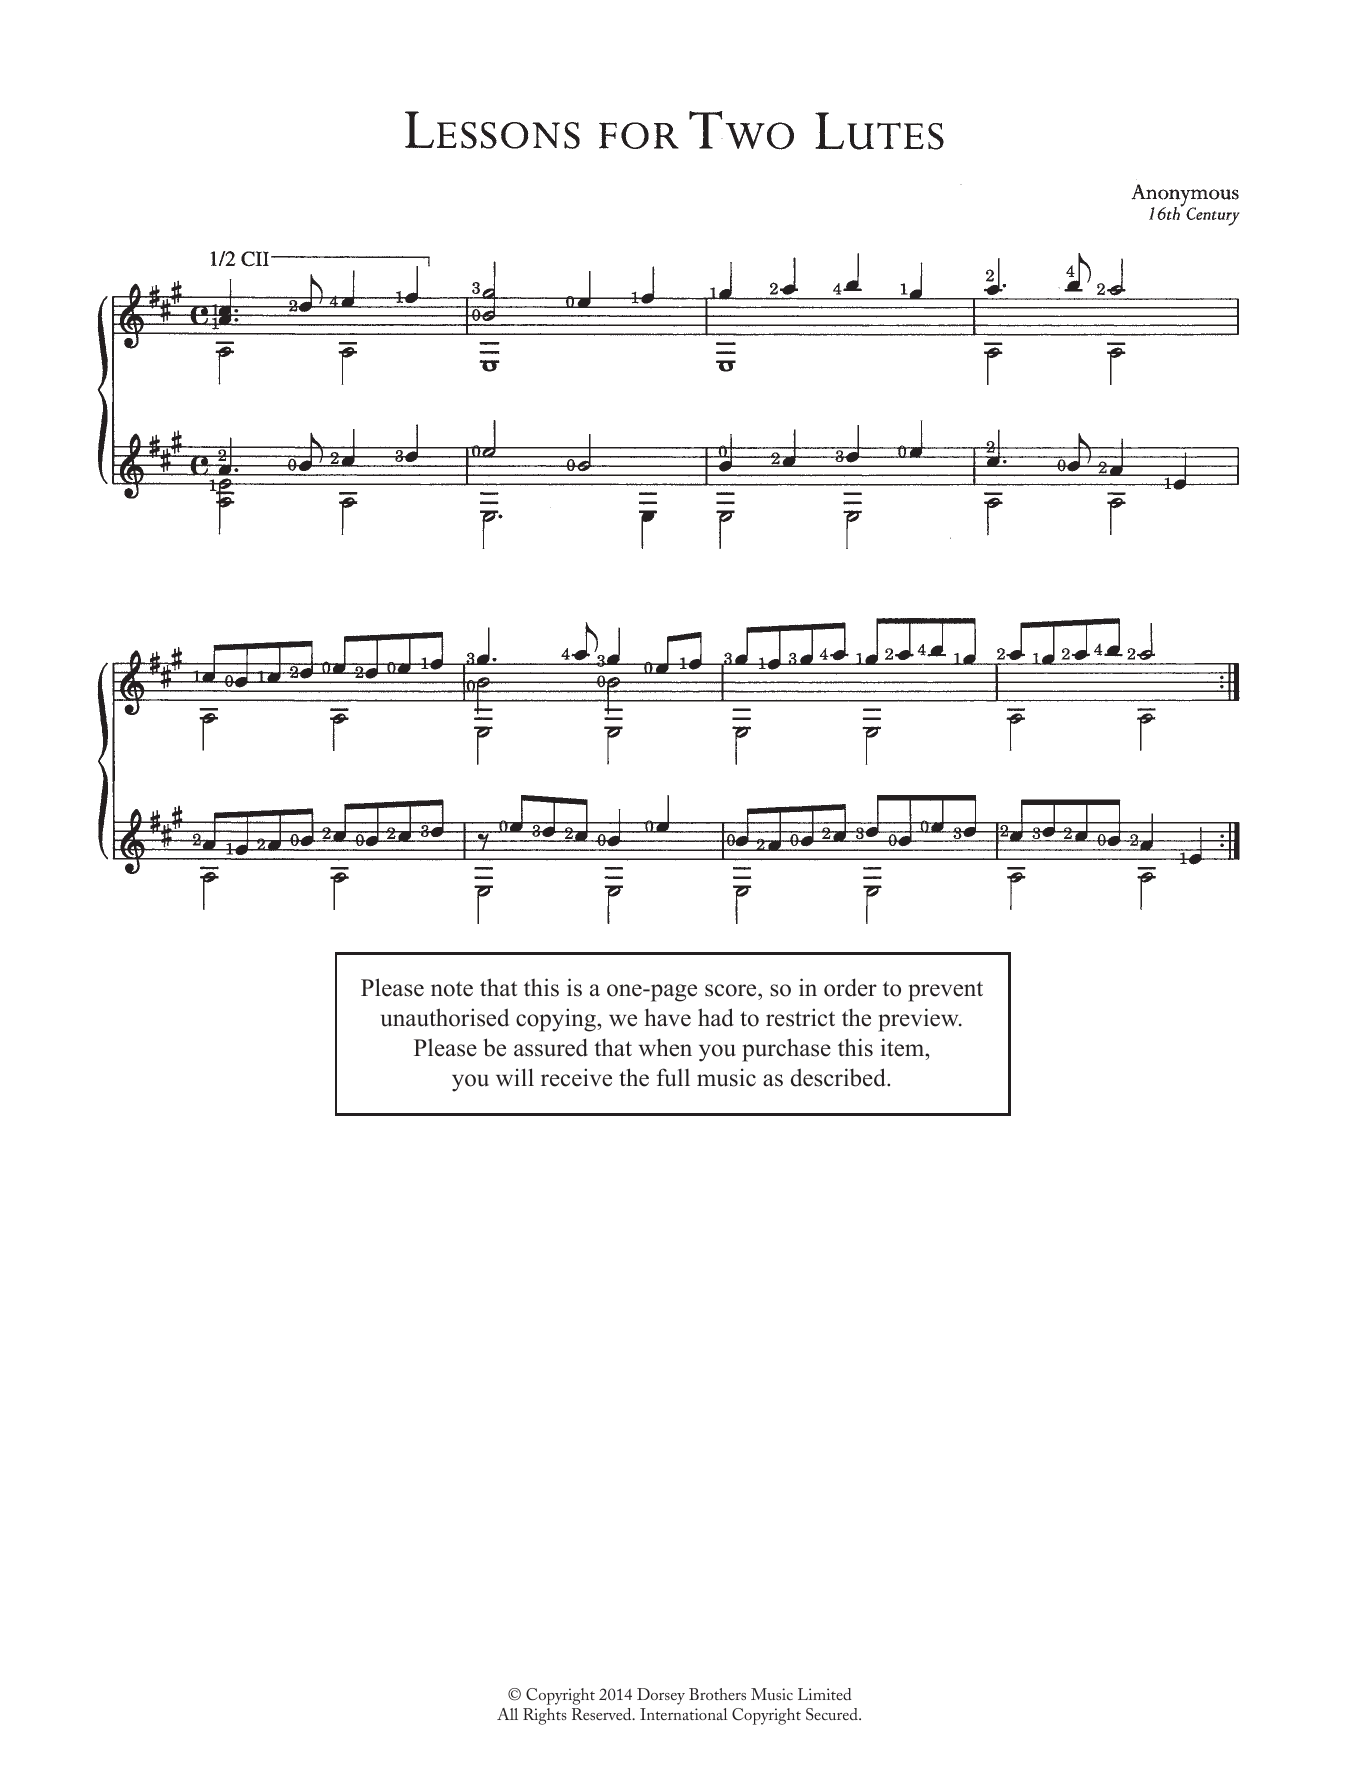 Download Anonymous Lessons For Two Lutes Sheet Music